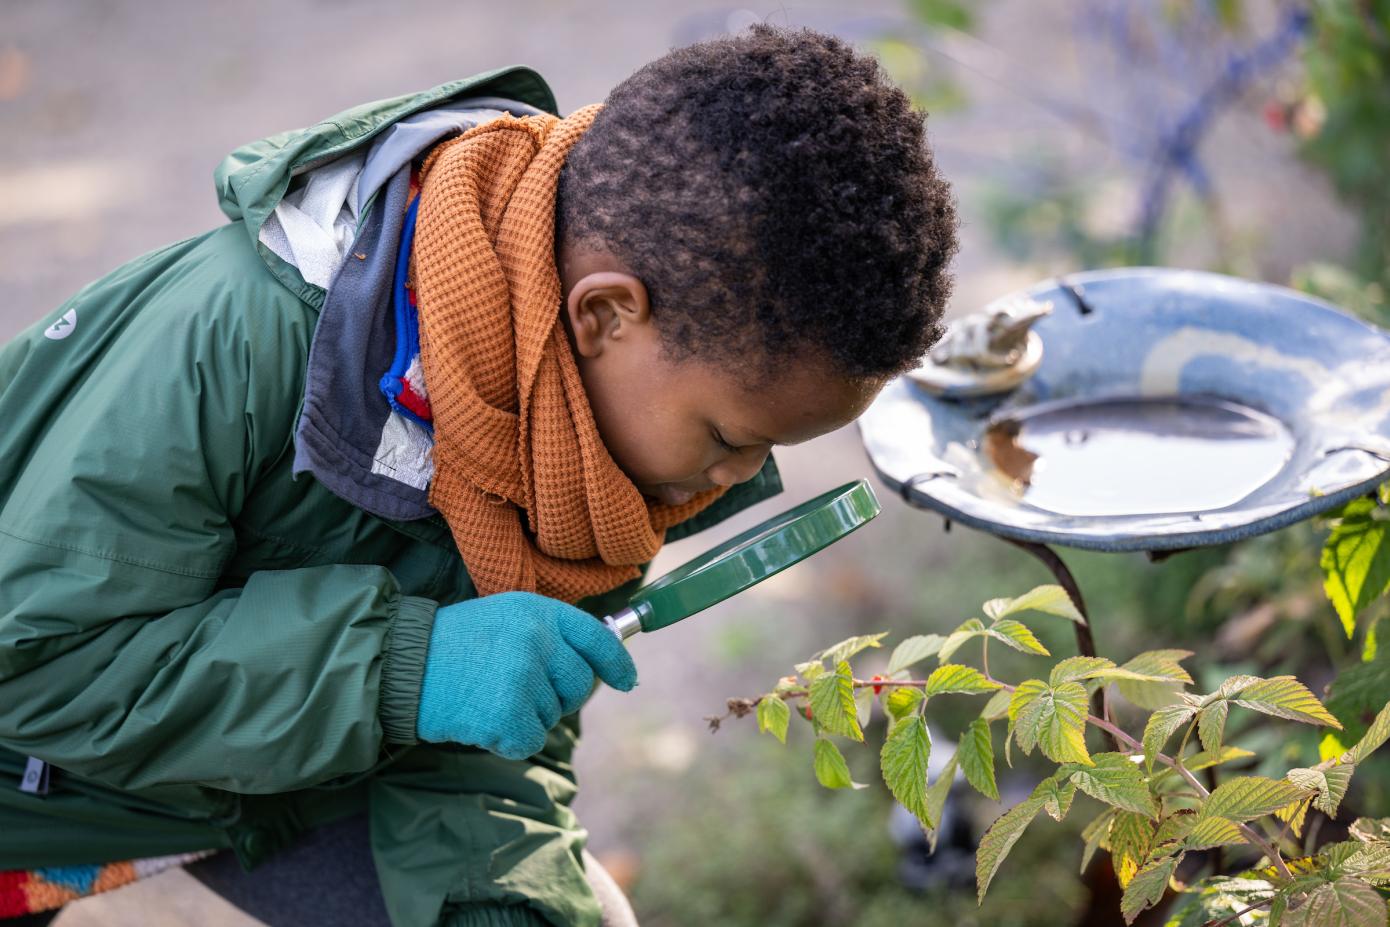 Child inspecting leaves through a magnifying glass